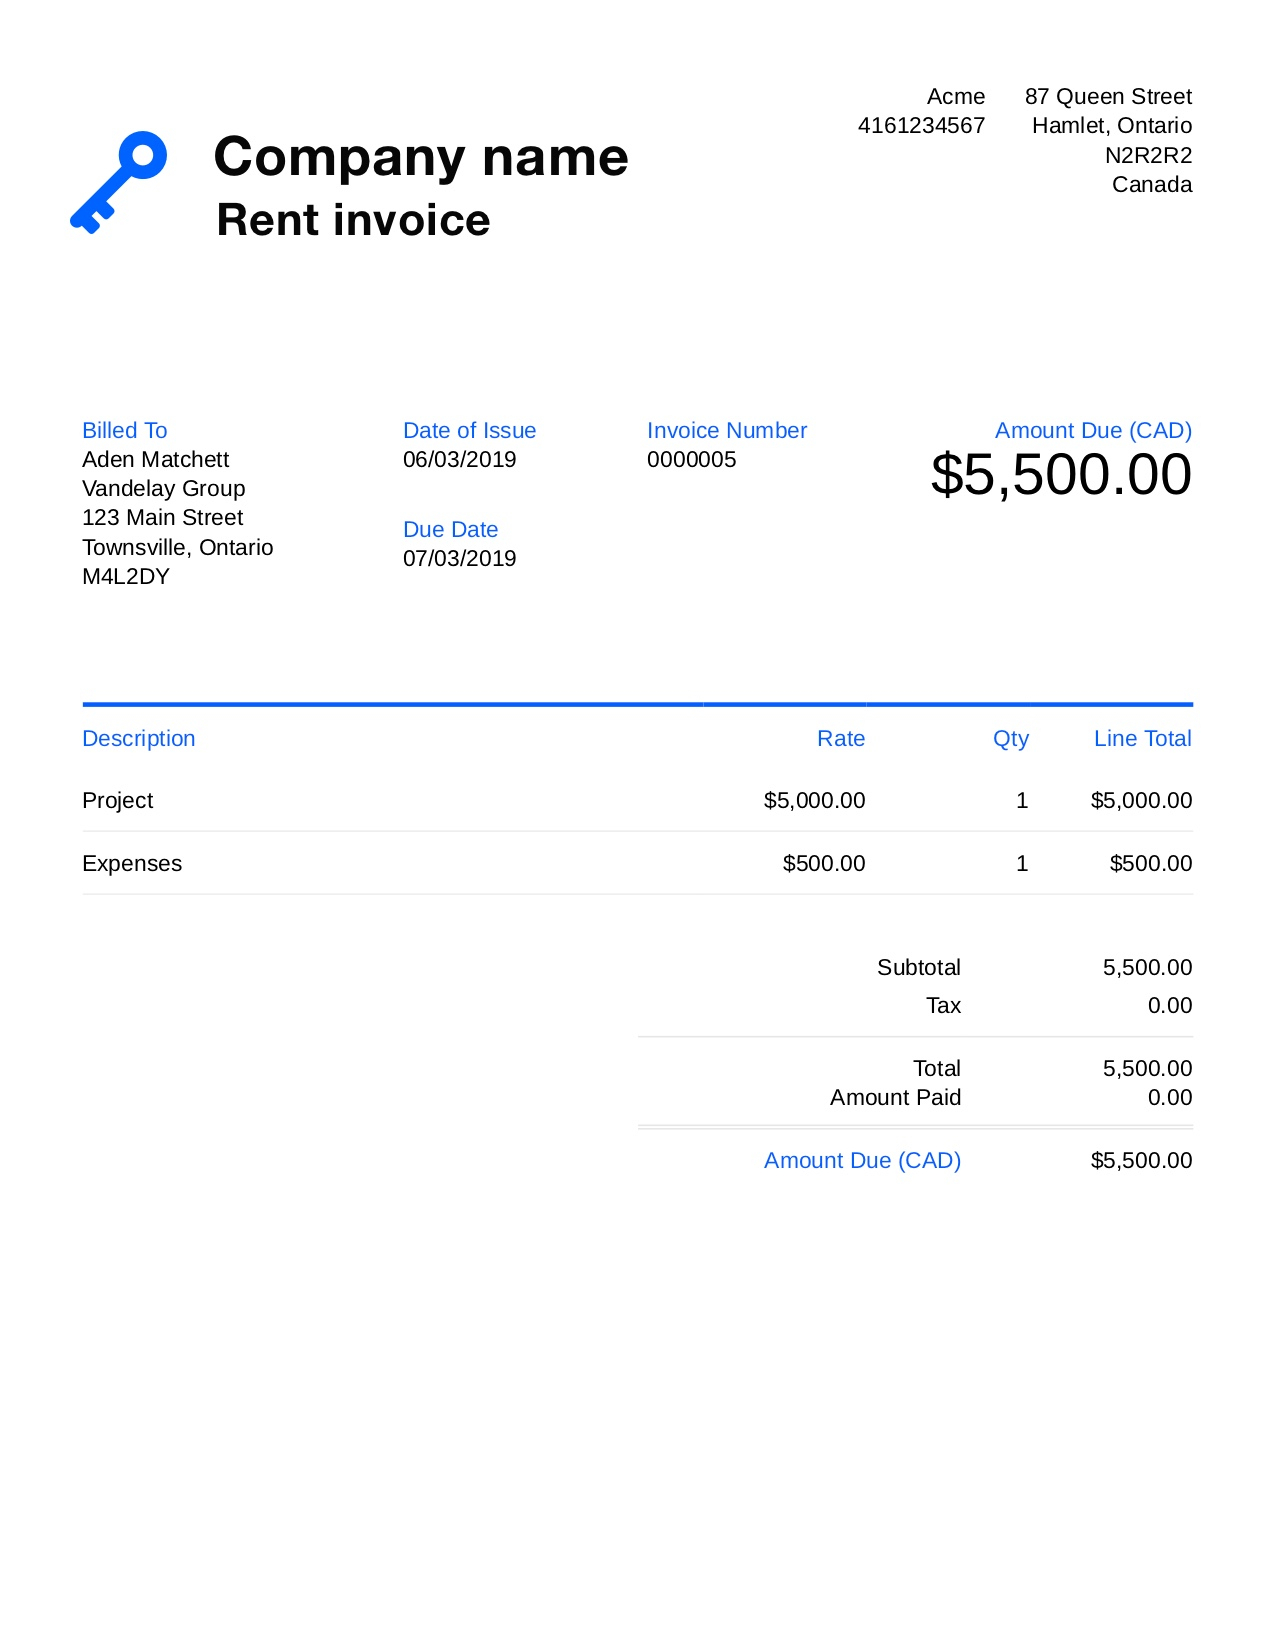 Free Rent Invoice Template. Customize And Send In 90 Seconds Inside Invoice Template For Rent